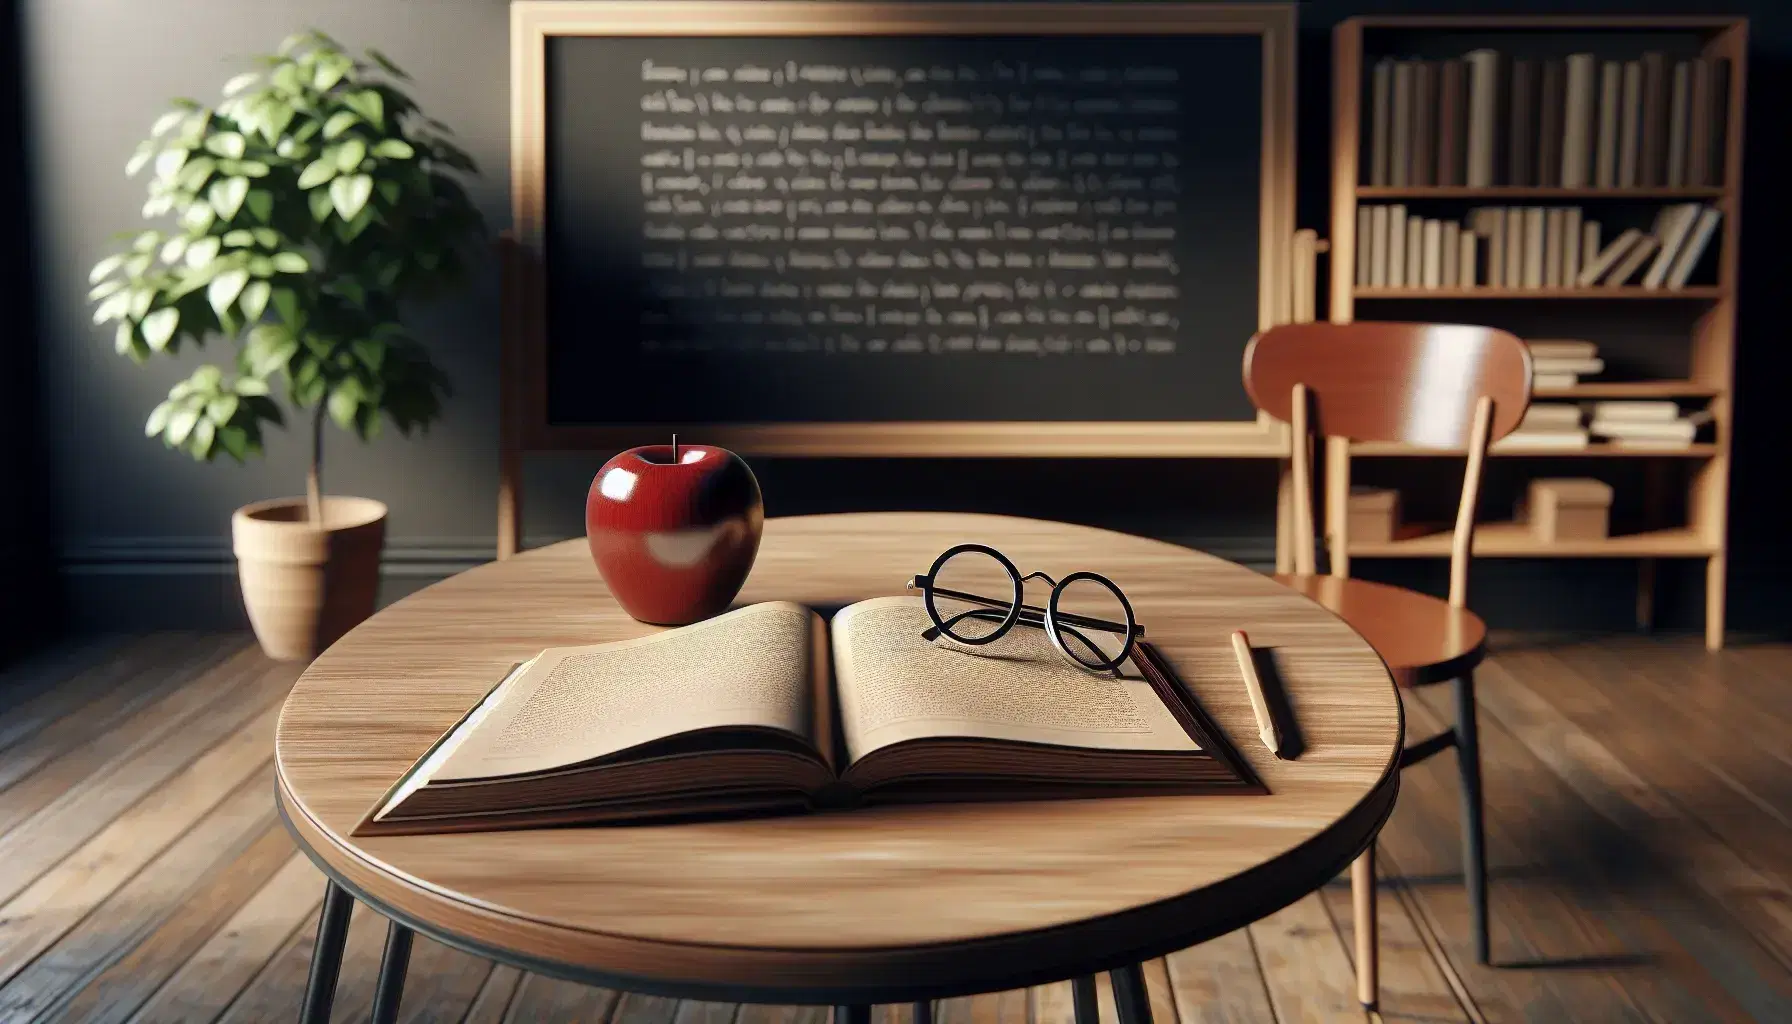 Cozy classroom with a round wooden table holding an open textbook, black-rimmed glasses, and a red apple, beside a clean chalkboard and a potted plant.